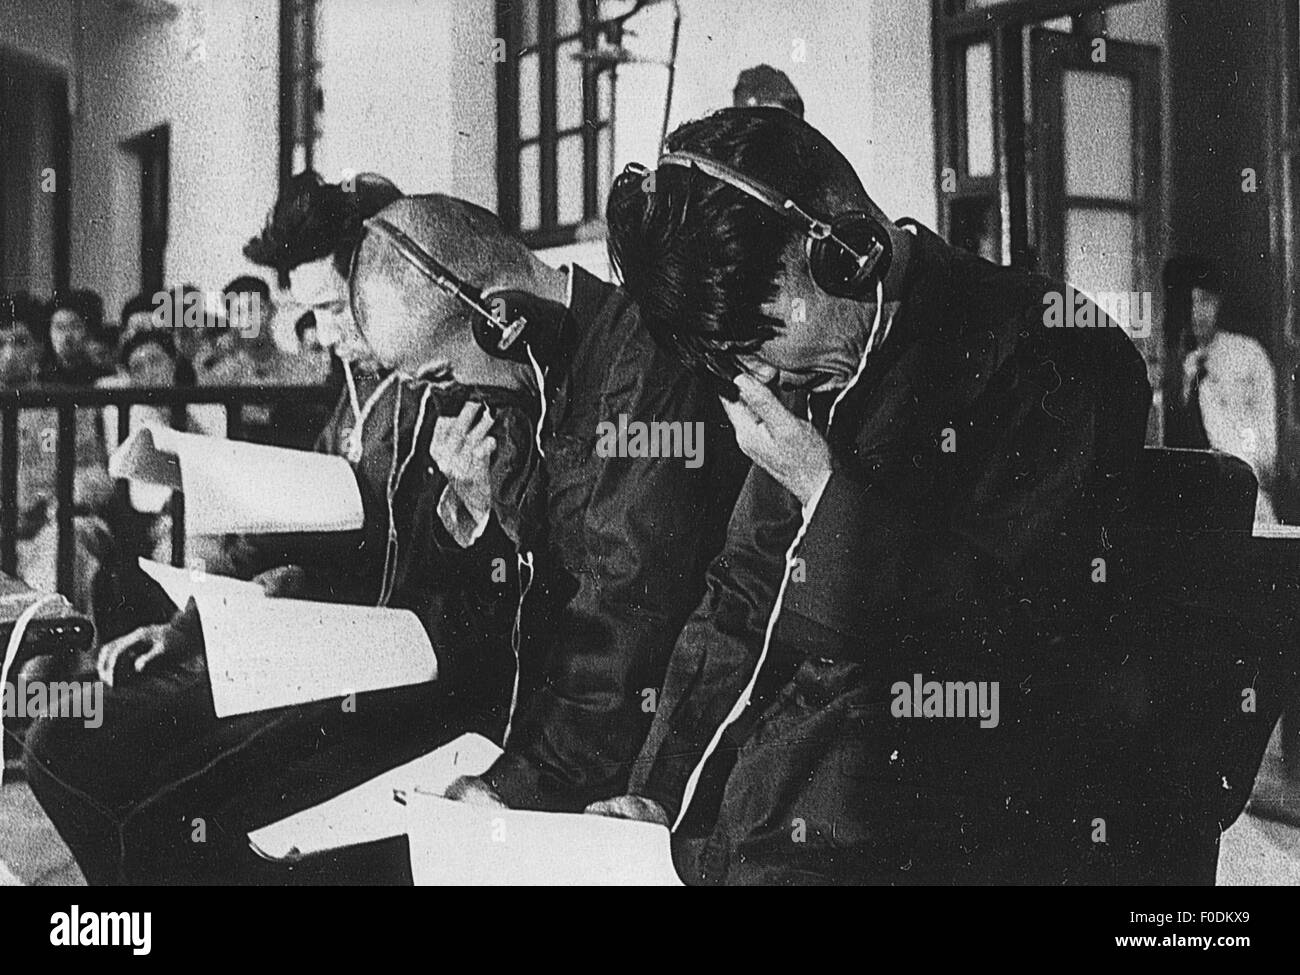 (150813) -- BEIJING, Aug. 13, 2015 (Xinhua) -- File photo taken in 1956 shows Japanese war criminals being tried at a special military court in Taiyuan, north China's Shanxi Province.     On Aug. 15, 1945, Japanese Emperor Hirohito delivered a recorded radio address to the nation, announcing the surrender of Japan in World War II, one day after Japan declared its acceptance of the provisions of the Potsdam Proclamation jointly issued by China, the United States and Britain on July 26, 1945, with the Soviet Union joining later. The proclamation, which radicated Japan's crimes of aggressions dur Stock Photo